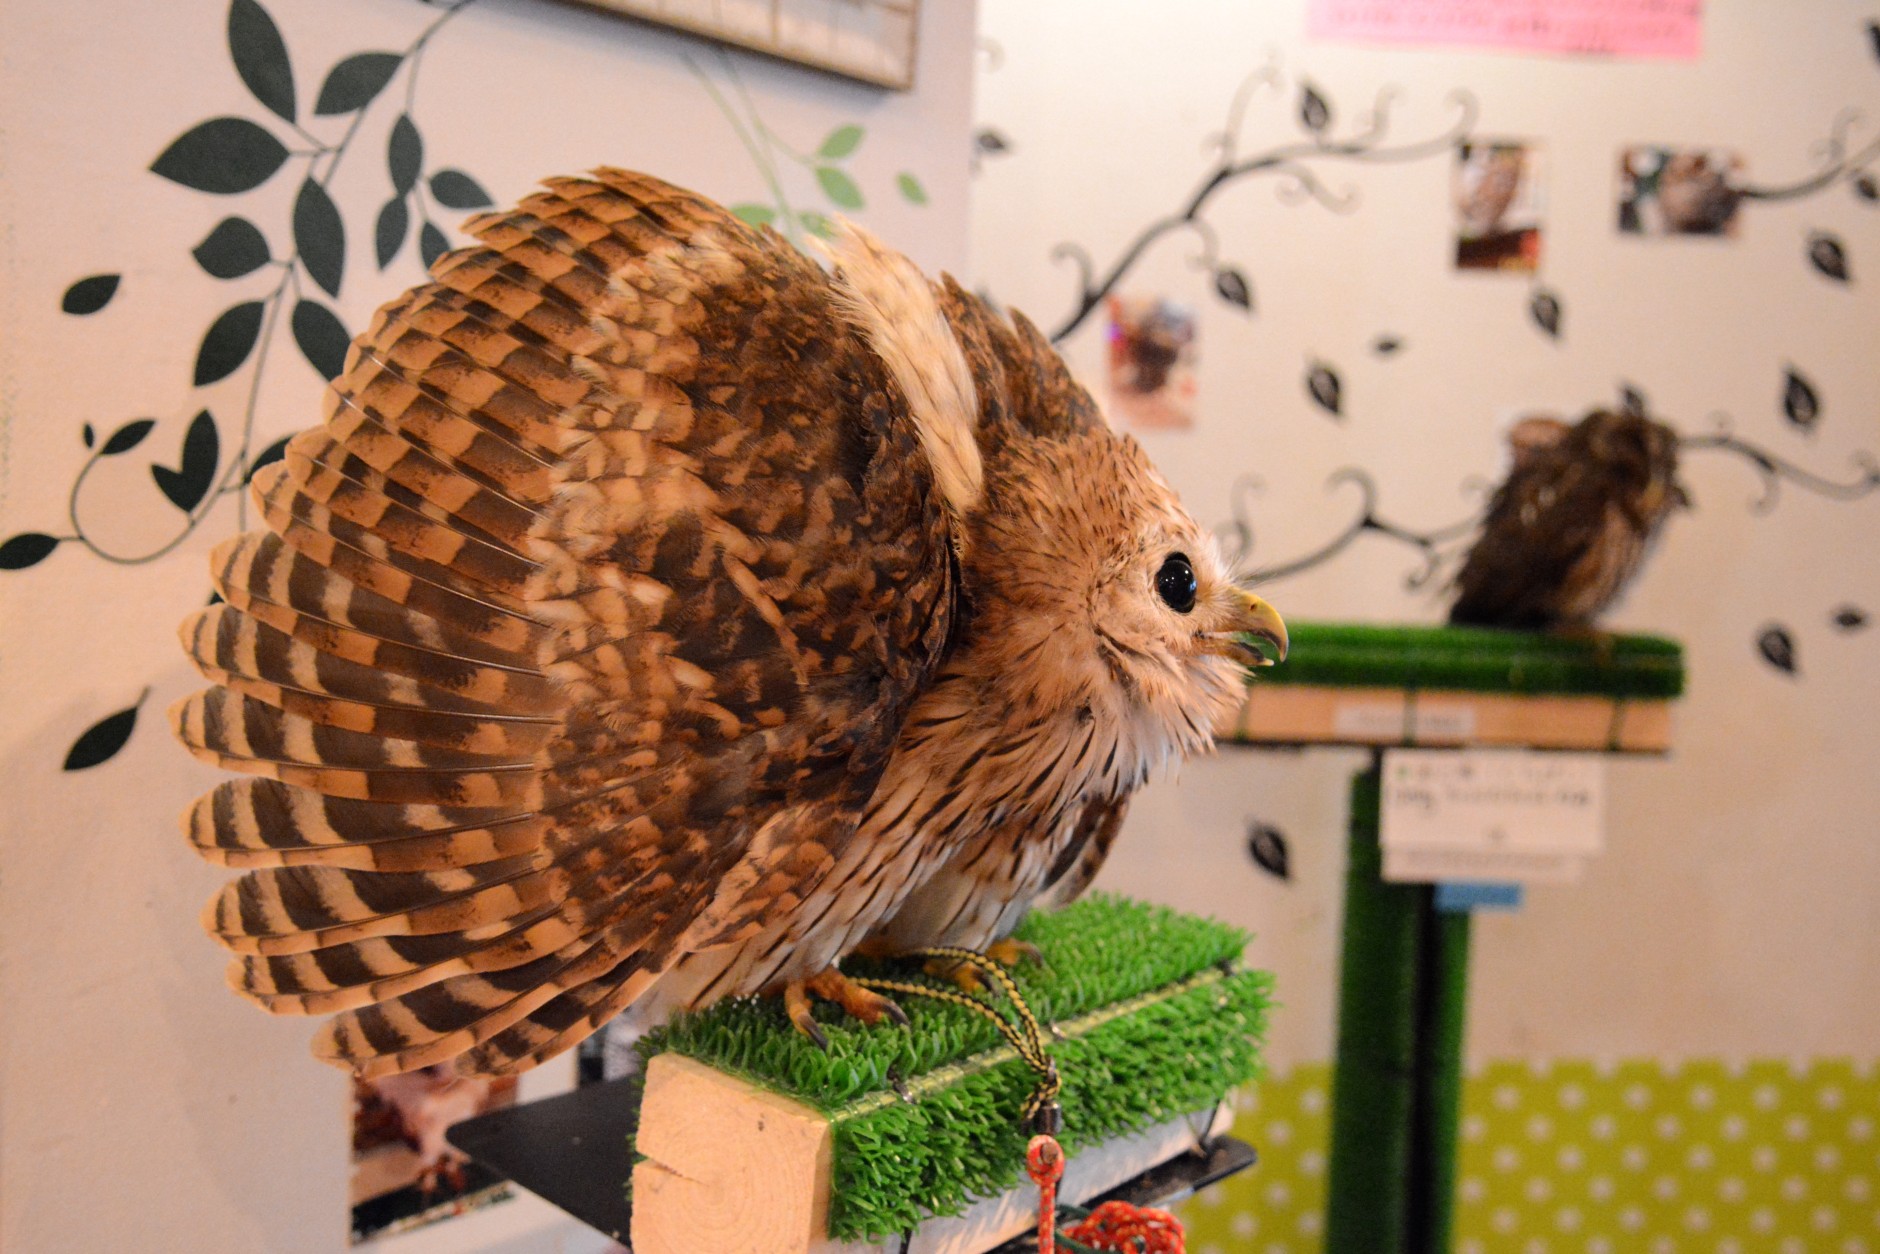 Japan has moved beyond cats and has opened cafes with more exotic animals, such as reptiles, birds and goats. Here, food and travel writer Laura Hayes is at an owl cafe. (Courtesy Laura Hayes) 